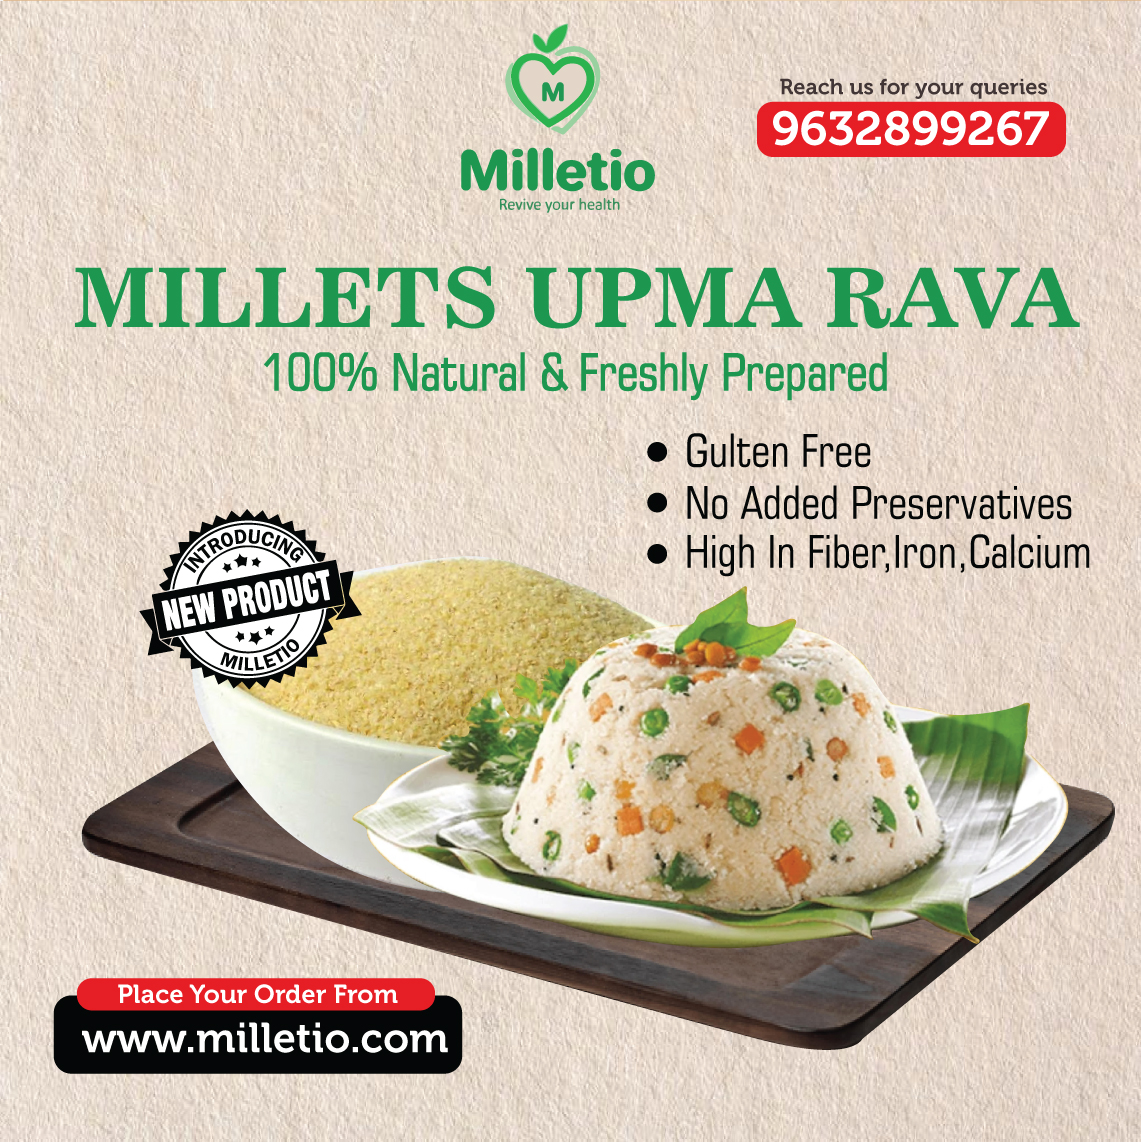 Millets-upma-ravva--buy-online-from-milletio.com-freshly-made-and-100%-natural